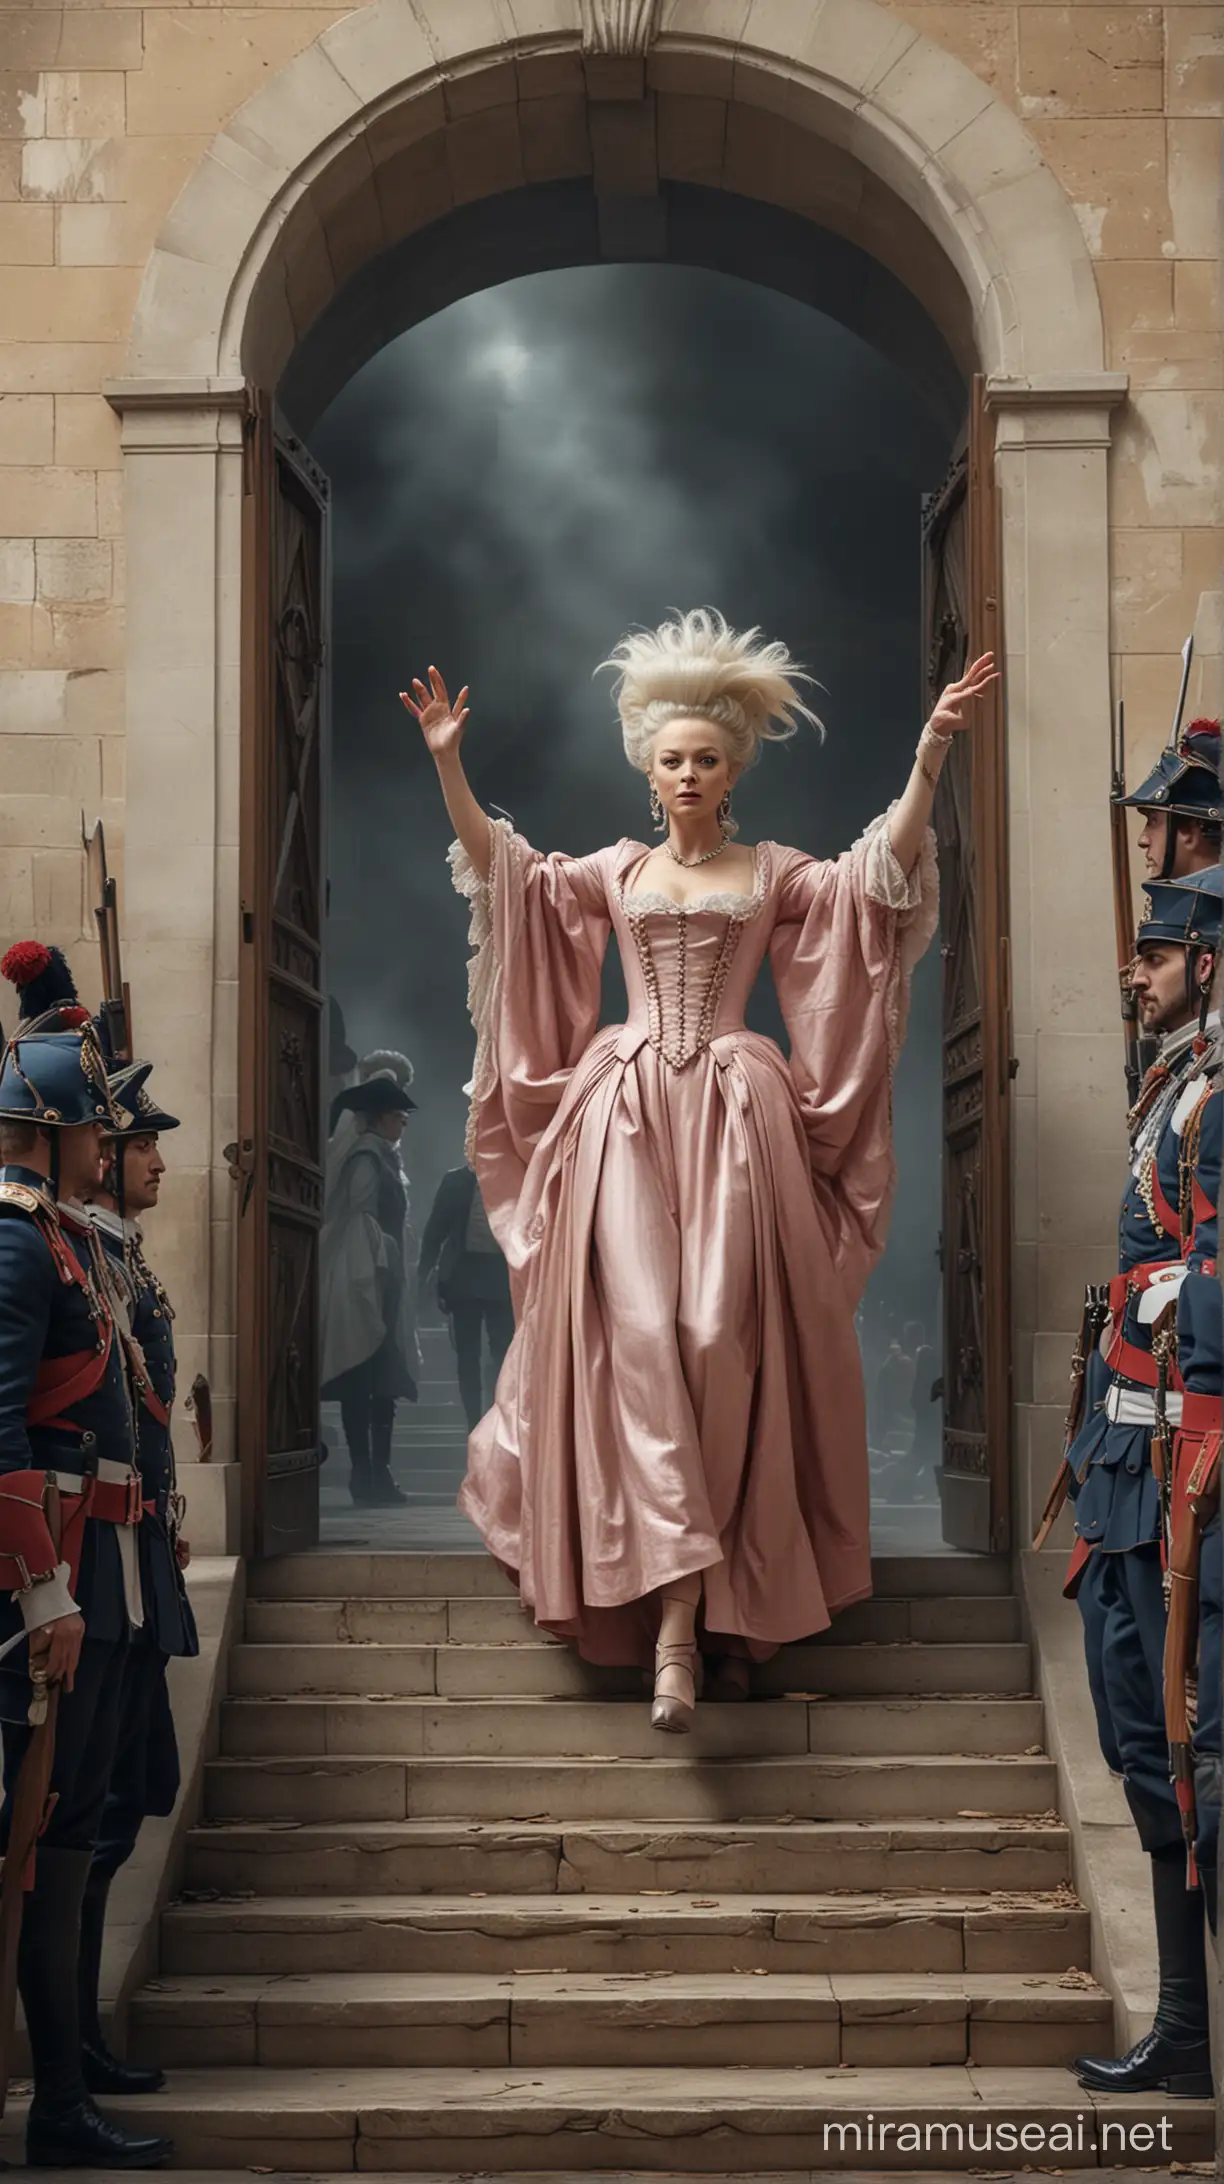 Marie Antoinette ascending the steps to the guillotine, surrounded by guards. hyper realistic